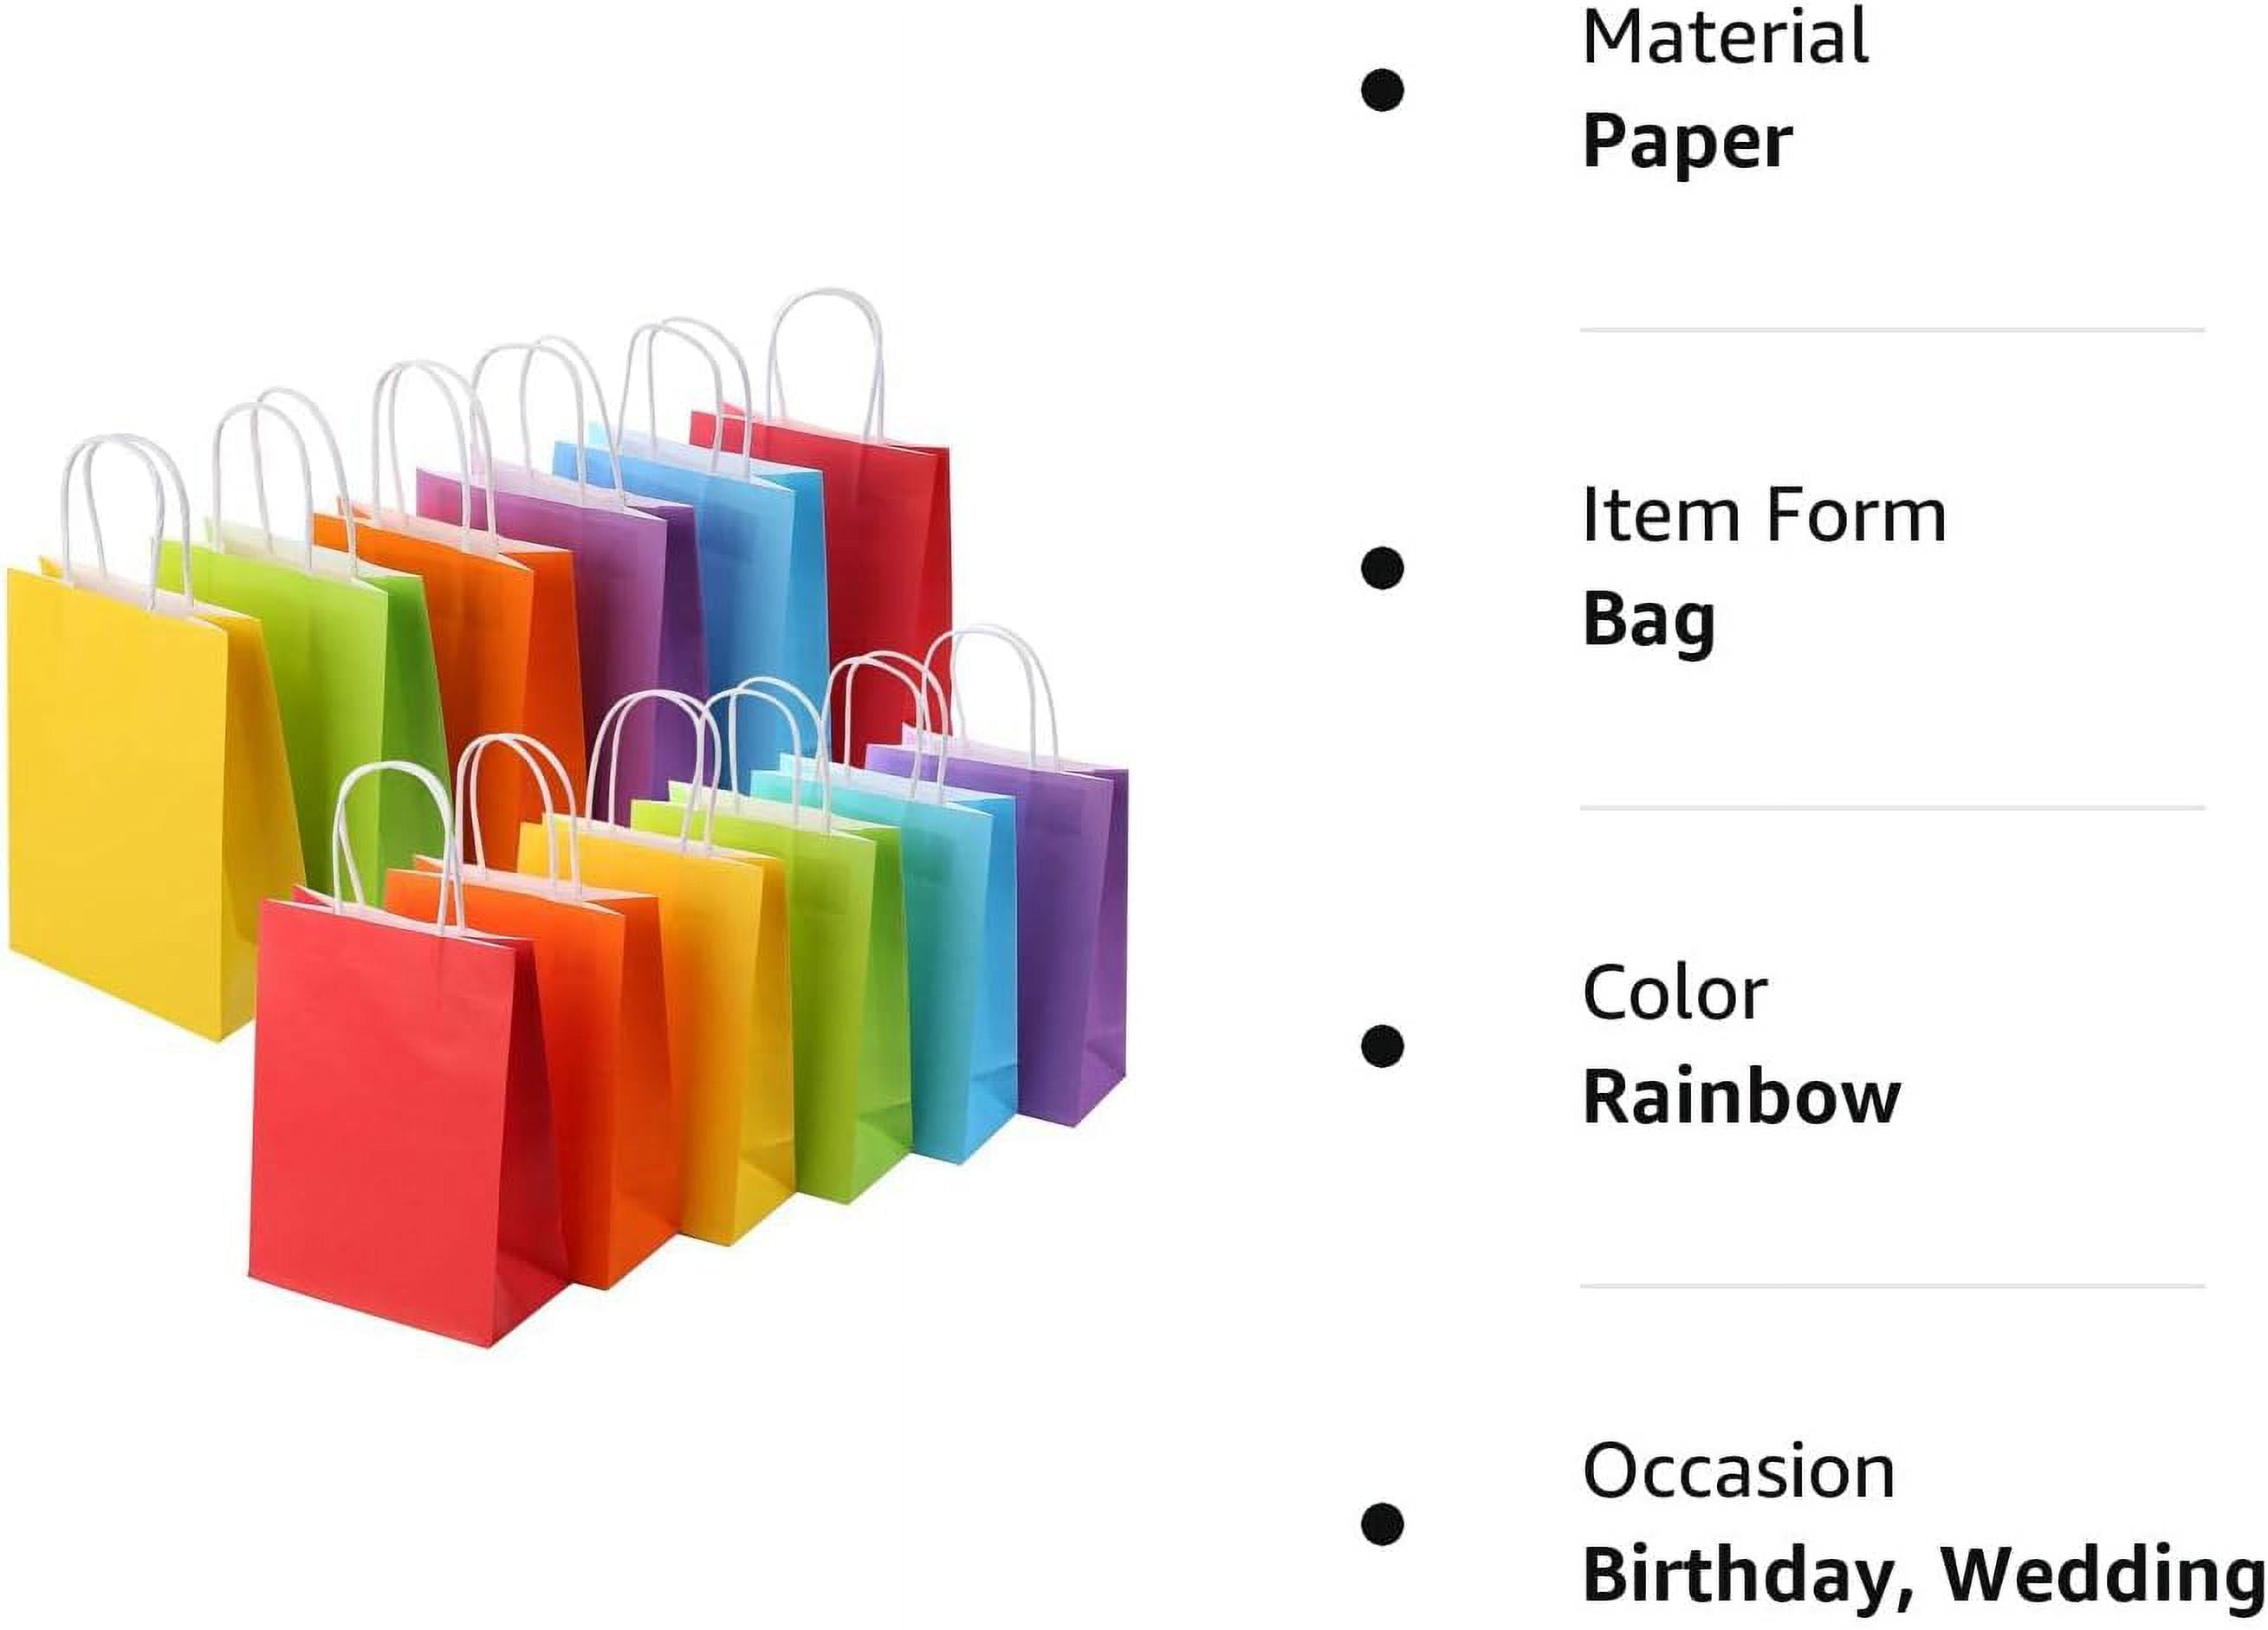 My Party Time 24 Pieces Large Paper Gift Bags (13 inch x 10 inch x 4.5 inch) with Handle Assorted Colors